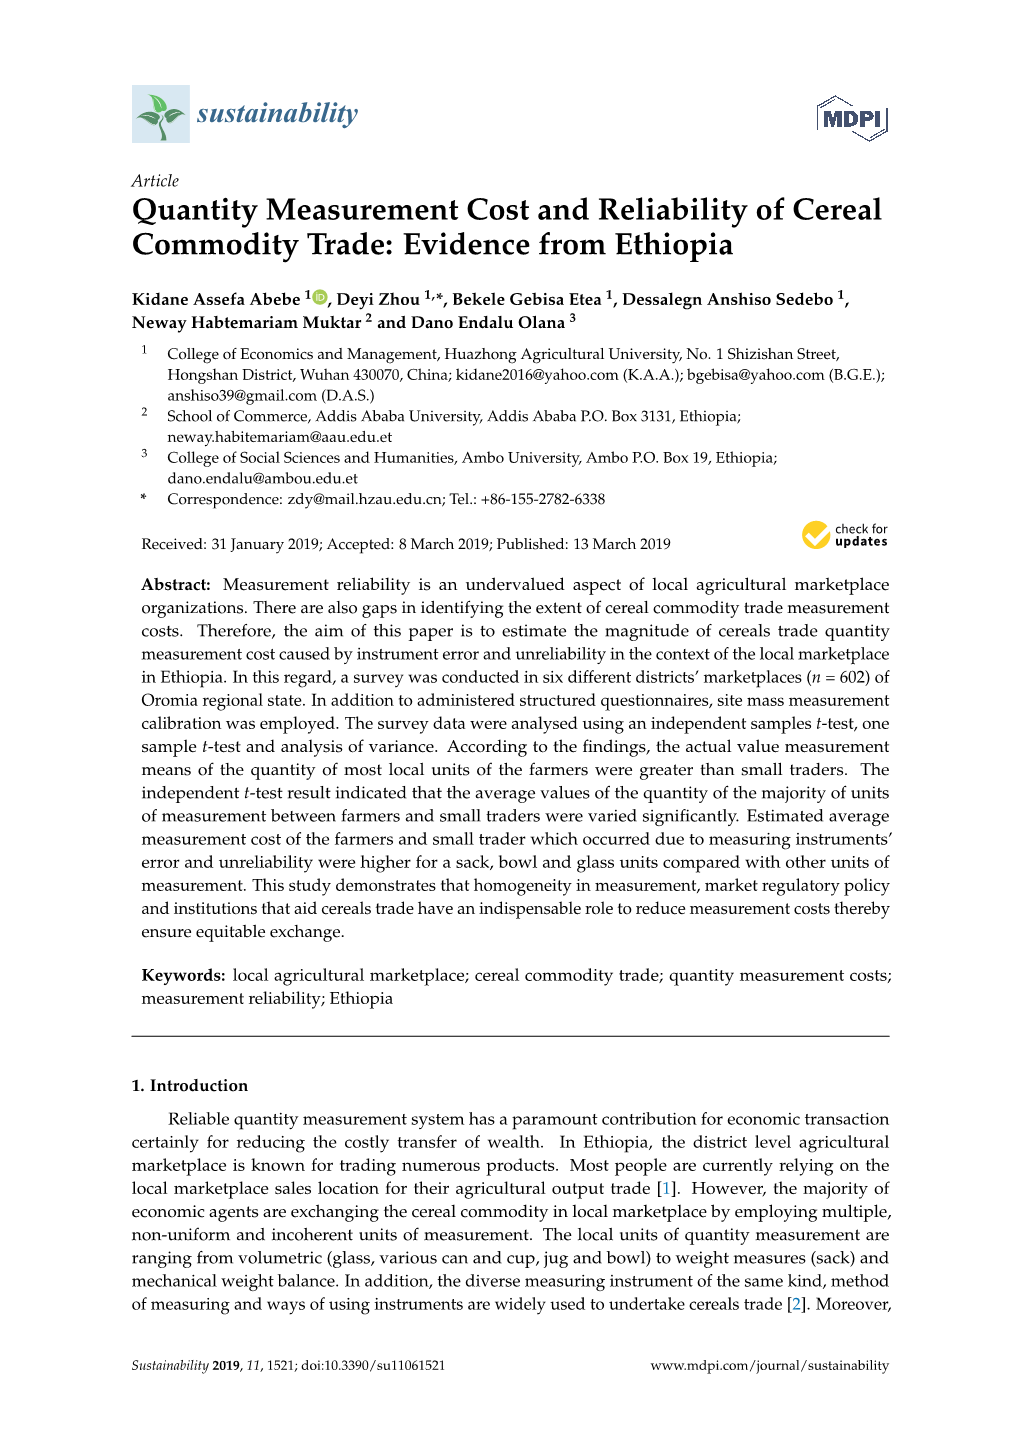 Quantity Measurement Cost and Reliability of Cereal Commodity Trade: Evidence from Ethiopia